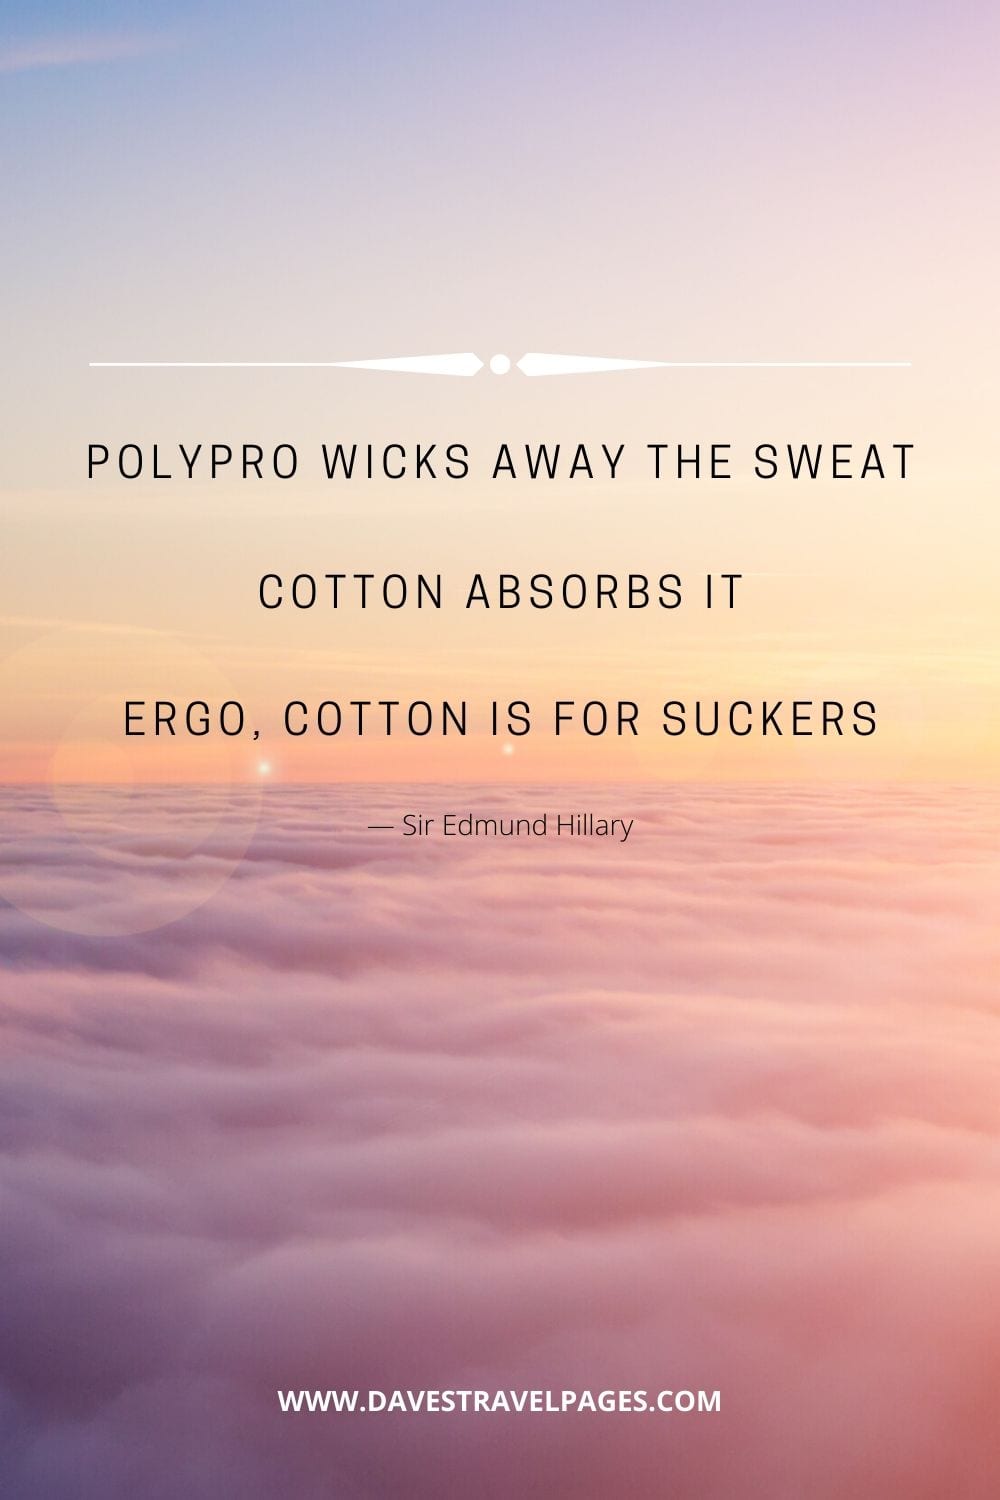 “Polypro wicks away the sweat. Cotton absorbs it. Ergo, cotton is for suckers” ― Sir Edmund Hillary